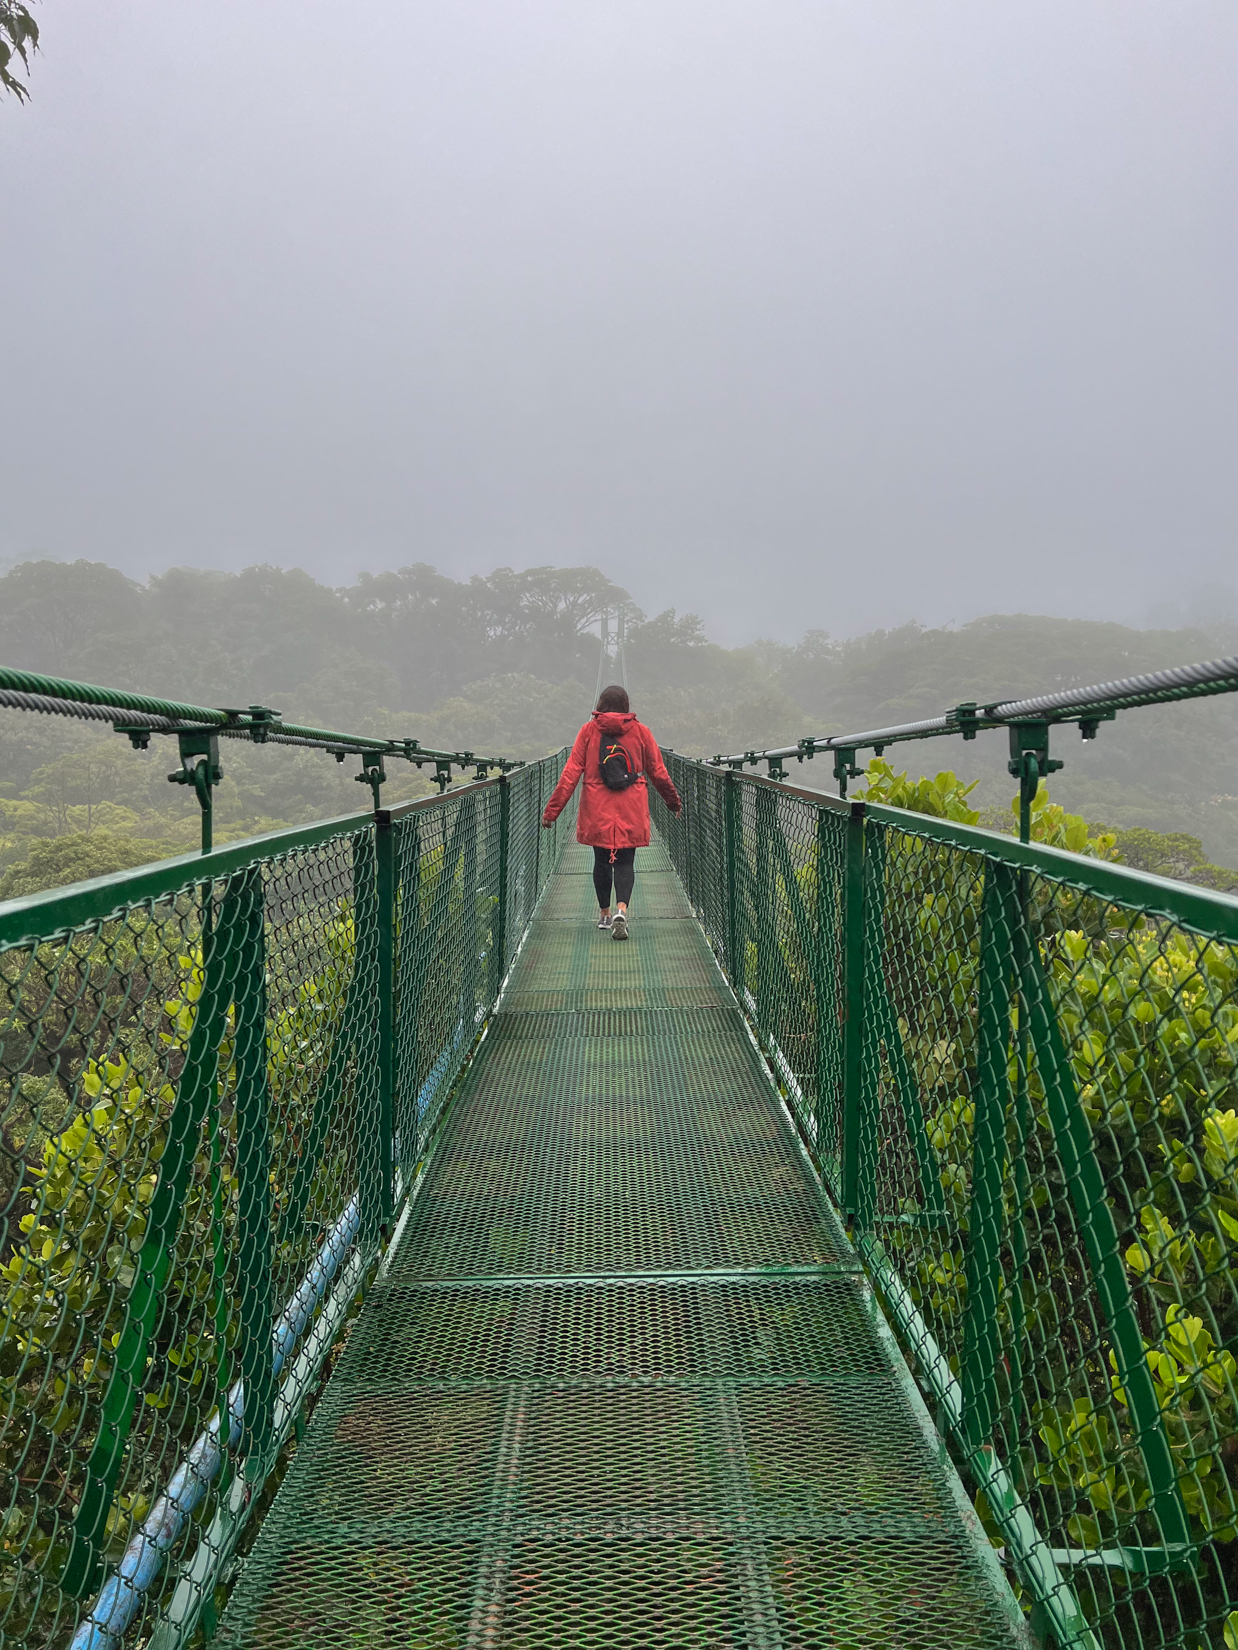 things to do in costa rica - hanging bridges at selvatura park in monteverde costa rica